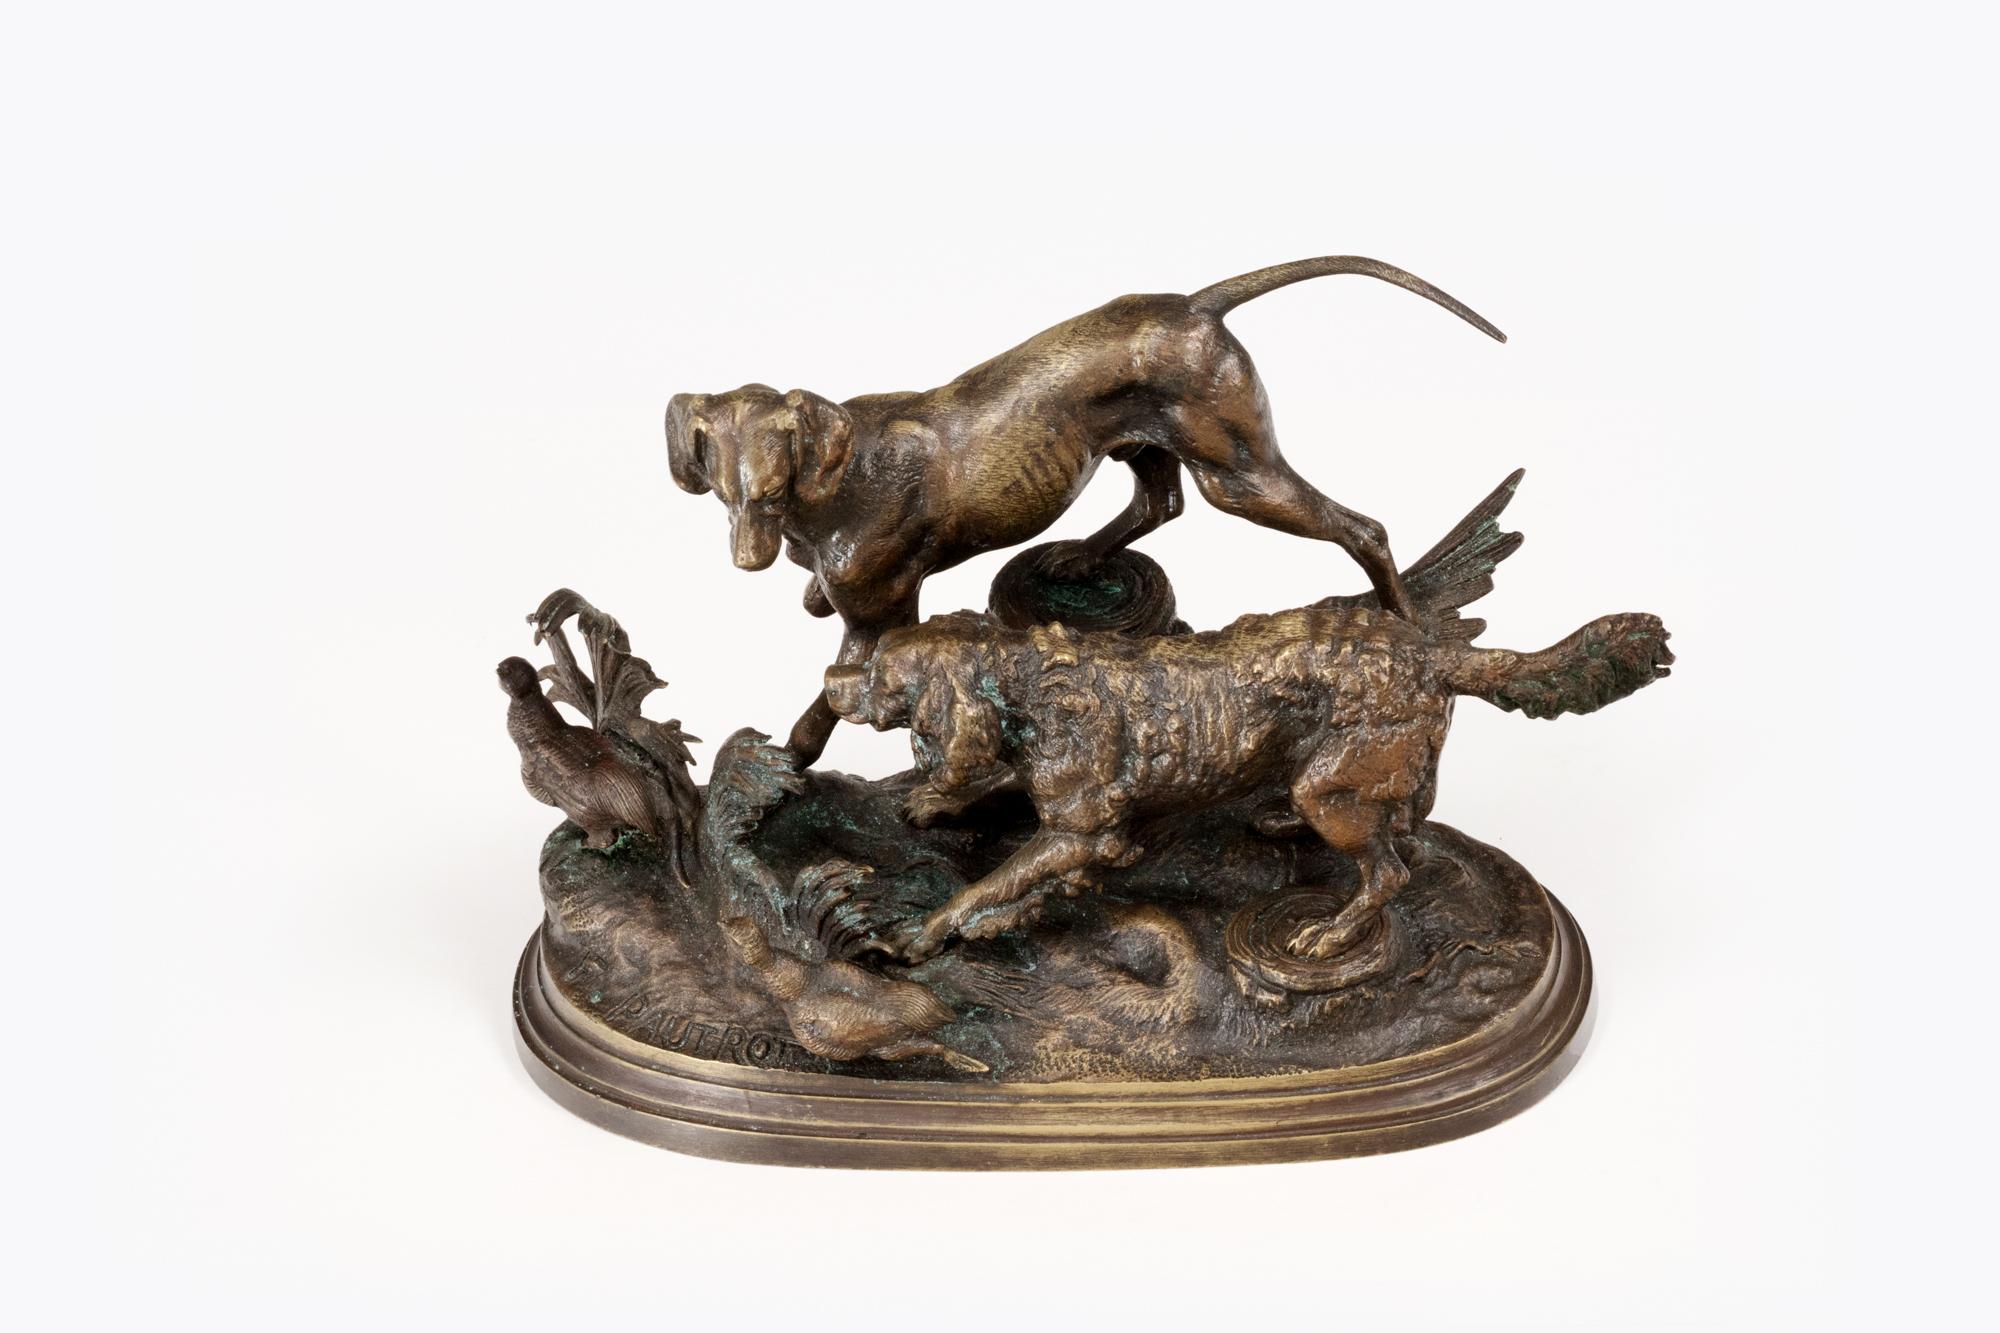 19th Century bronze statue of a pointer and spaniel hunting grouse with signature of F. Pautrot.

Ferdinand Pautrot’s (French, 1832-1874) first recorded exhibit was at the Salon in Paris in 1861 with three entries. He continued to exhibit at the